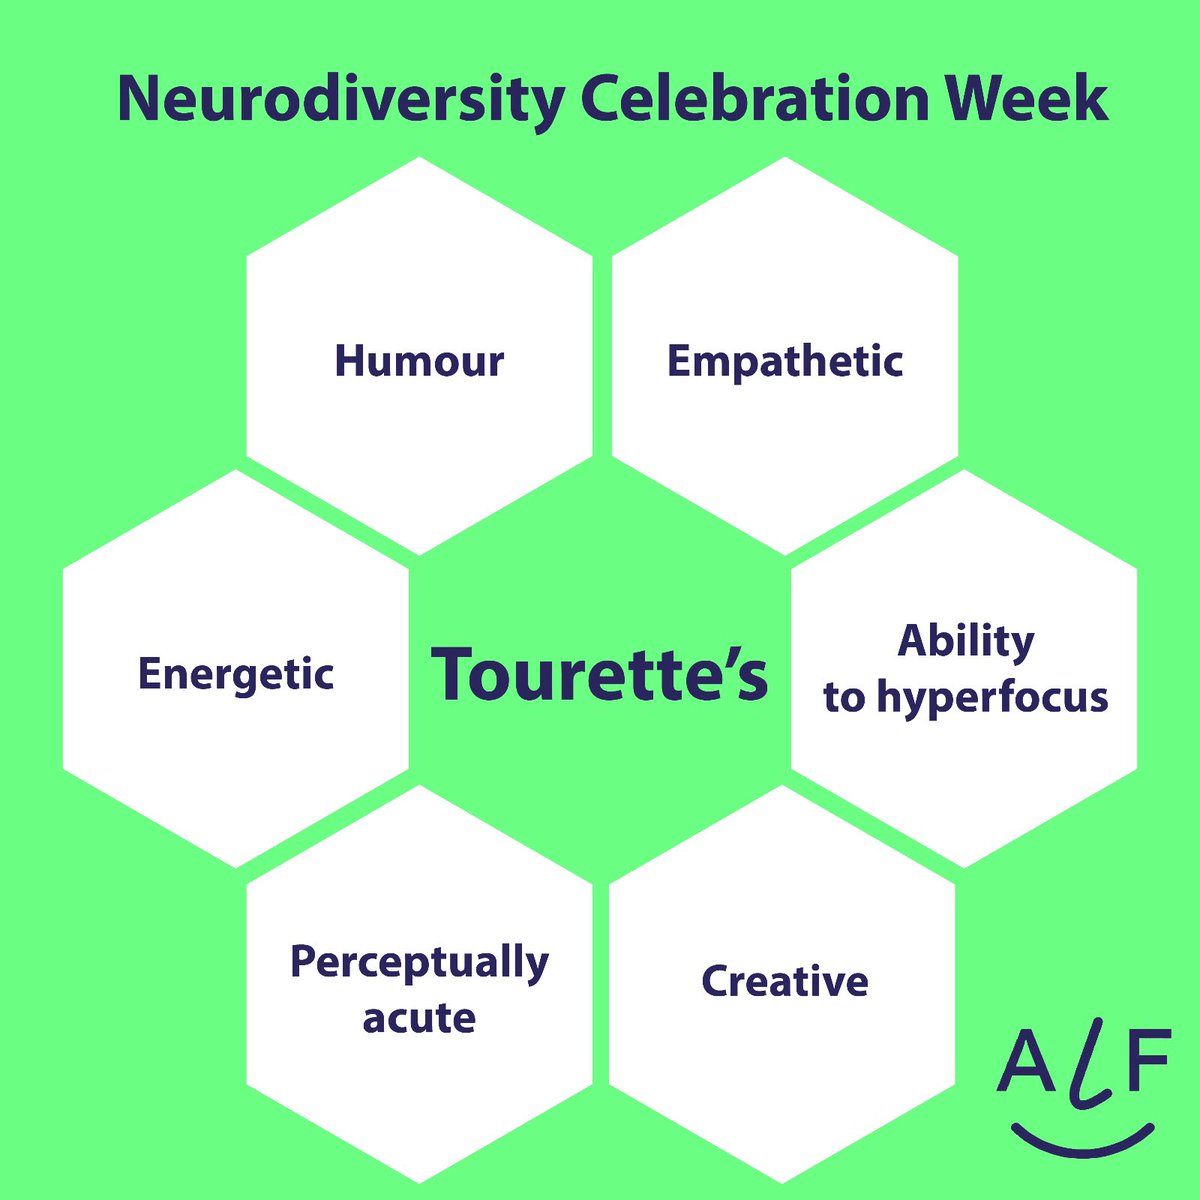 Final day of #NeurodiversityCelebrationWeek, and today we’re honouring Tourette’s. Did you know it is estimated that TS affects one child in every hundred & more than 300,000 children & adults in the UK live with the condition? What other strengths do you see in Tourette’s?